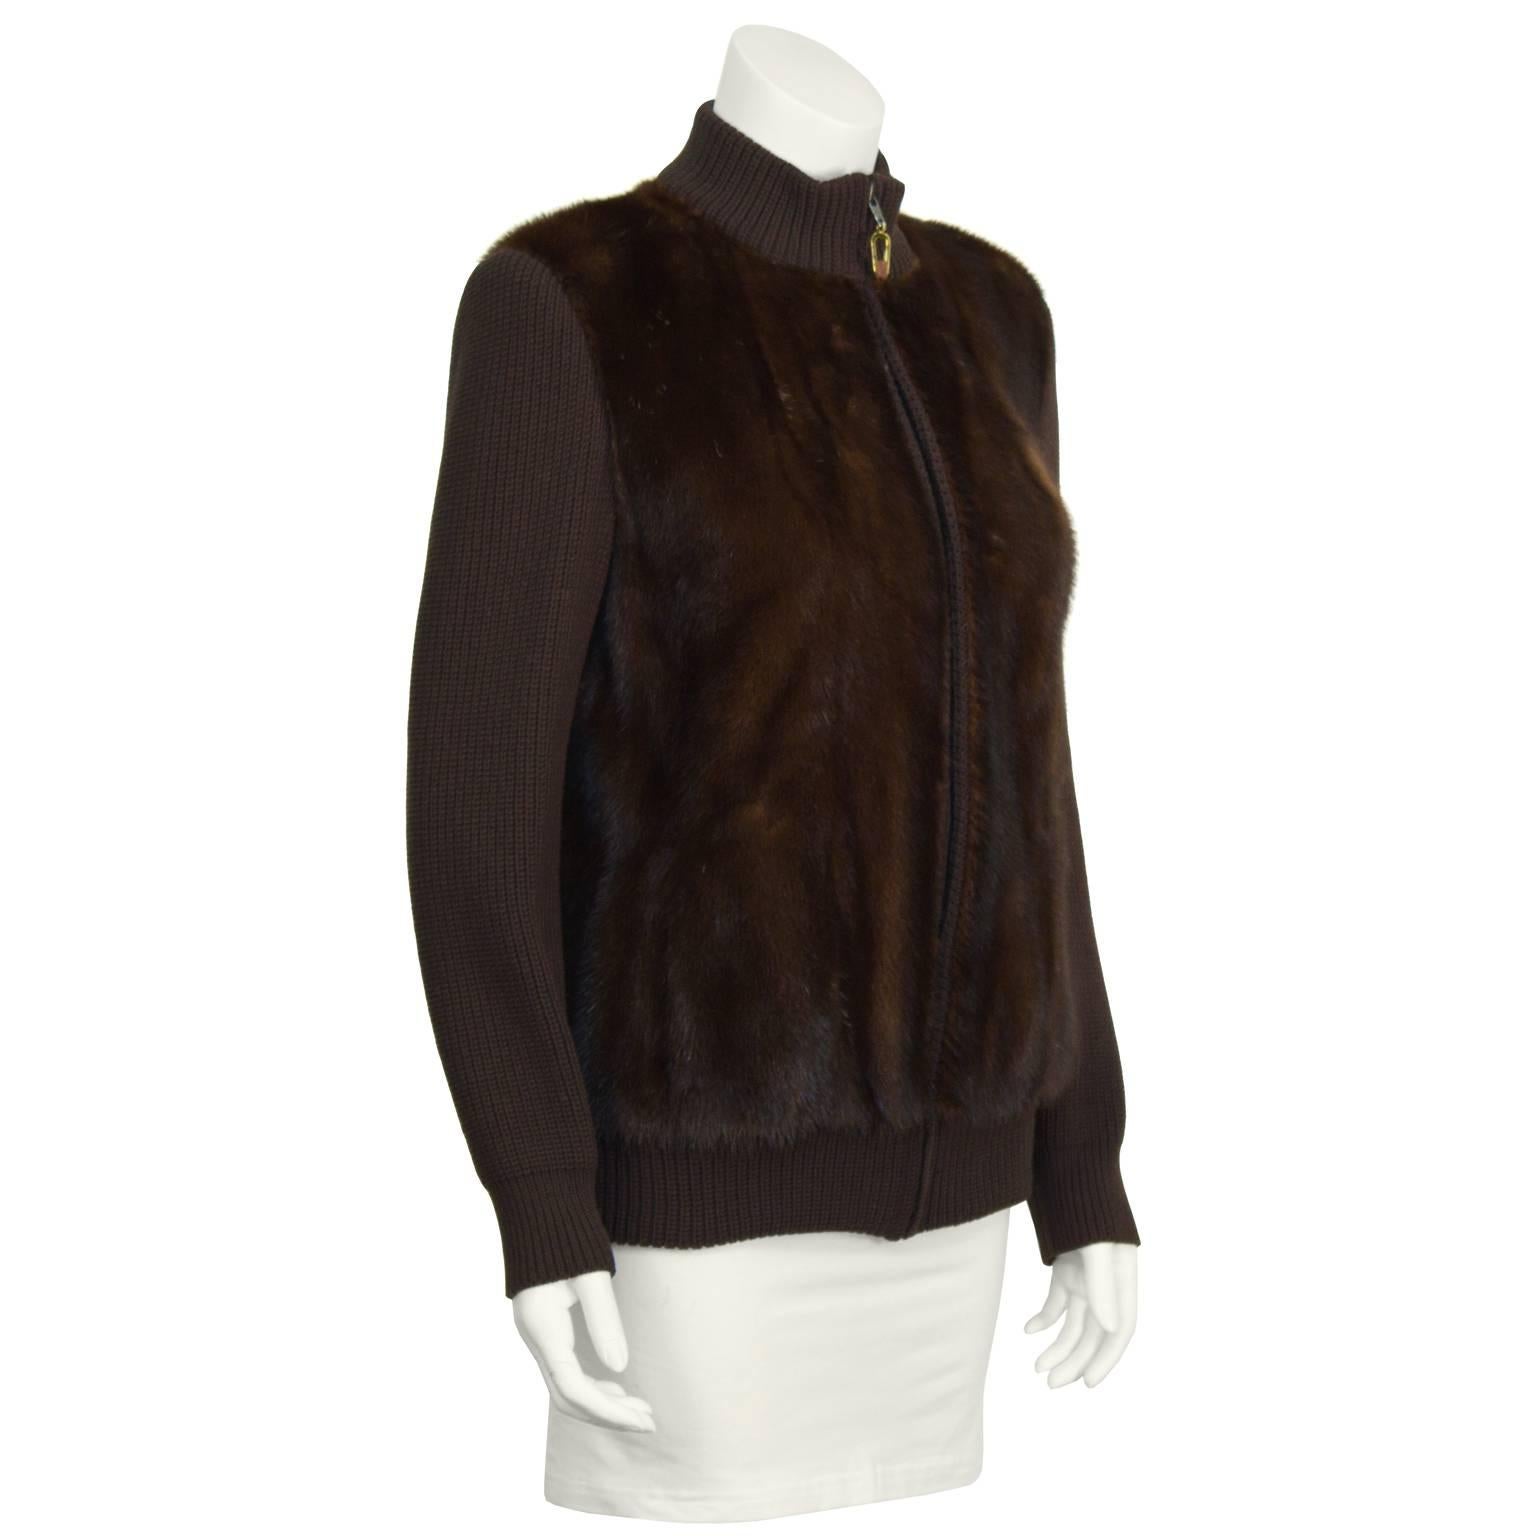 Anonymous made in France brown fur bomber jacket from the 1970's. Jacket features chocolate brown mink fur front panels, and a zipper up the front with a gold tab. The sleeves, collar, cuffs and hem are hand knit in matching brown wool. Interior is